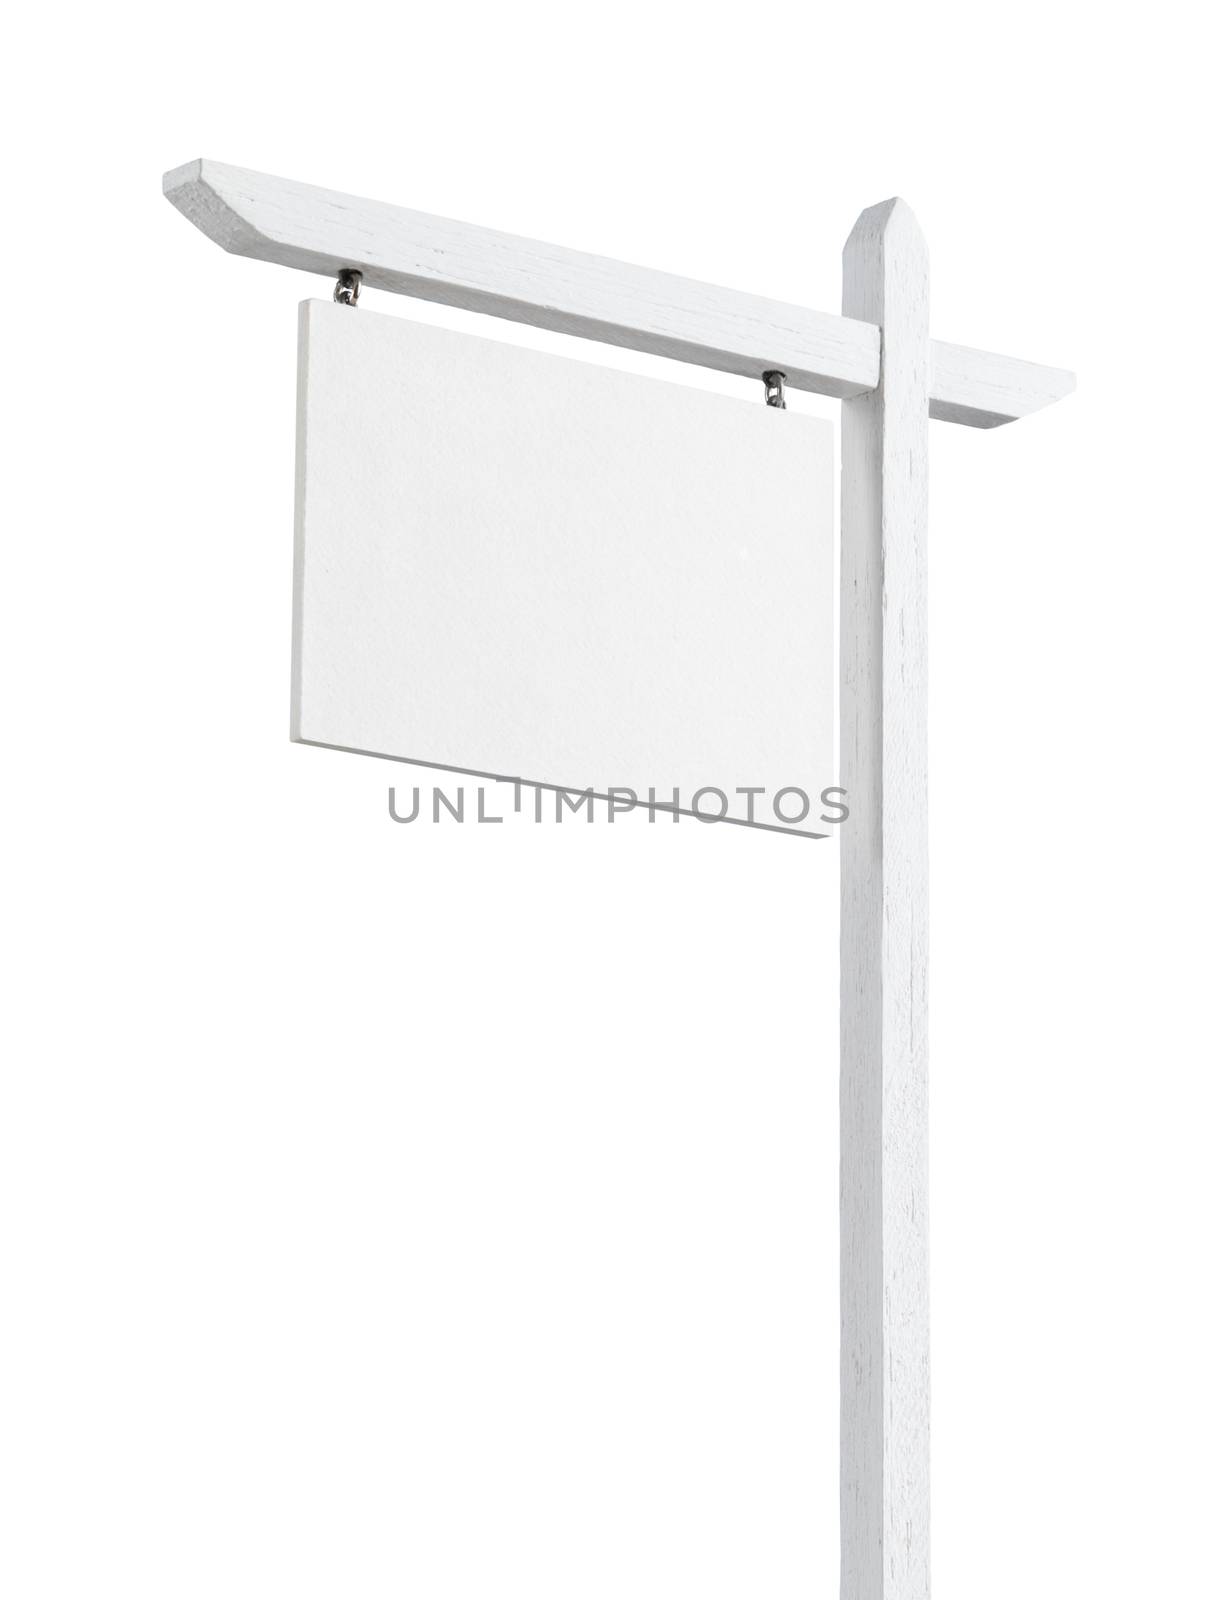 Blank Real Estate Sign Isolated on a White Background.